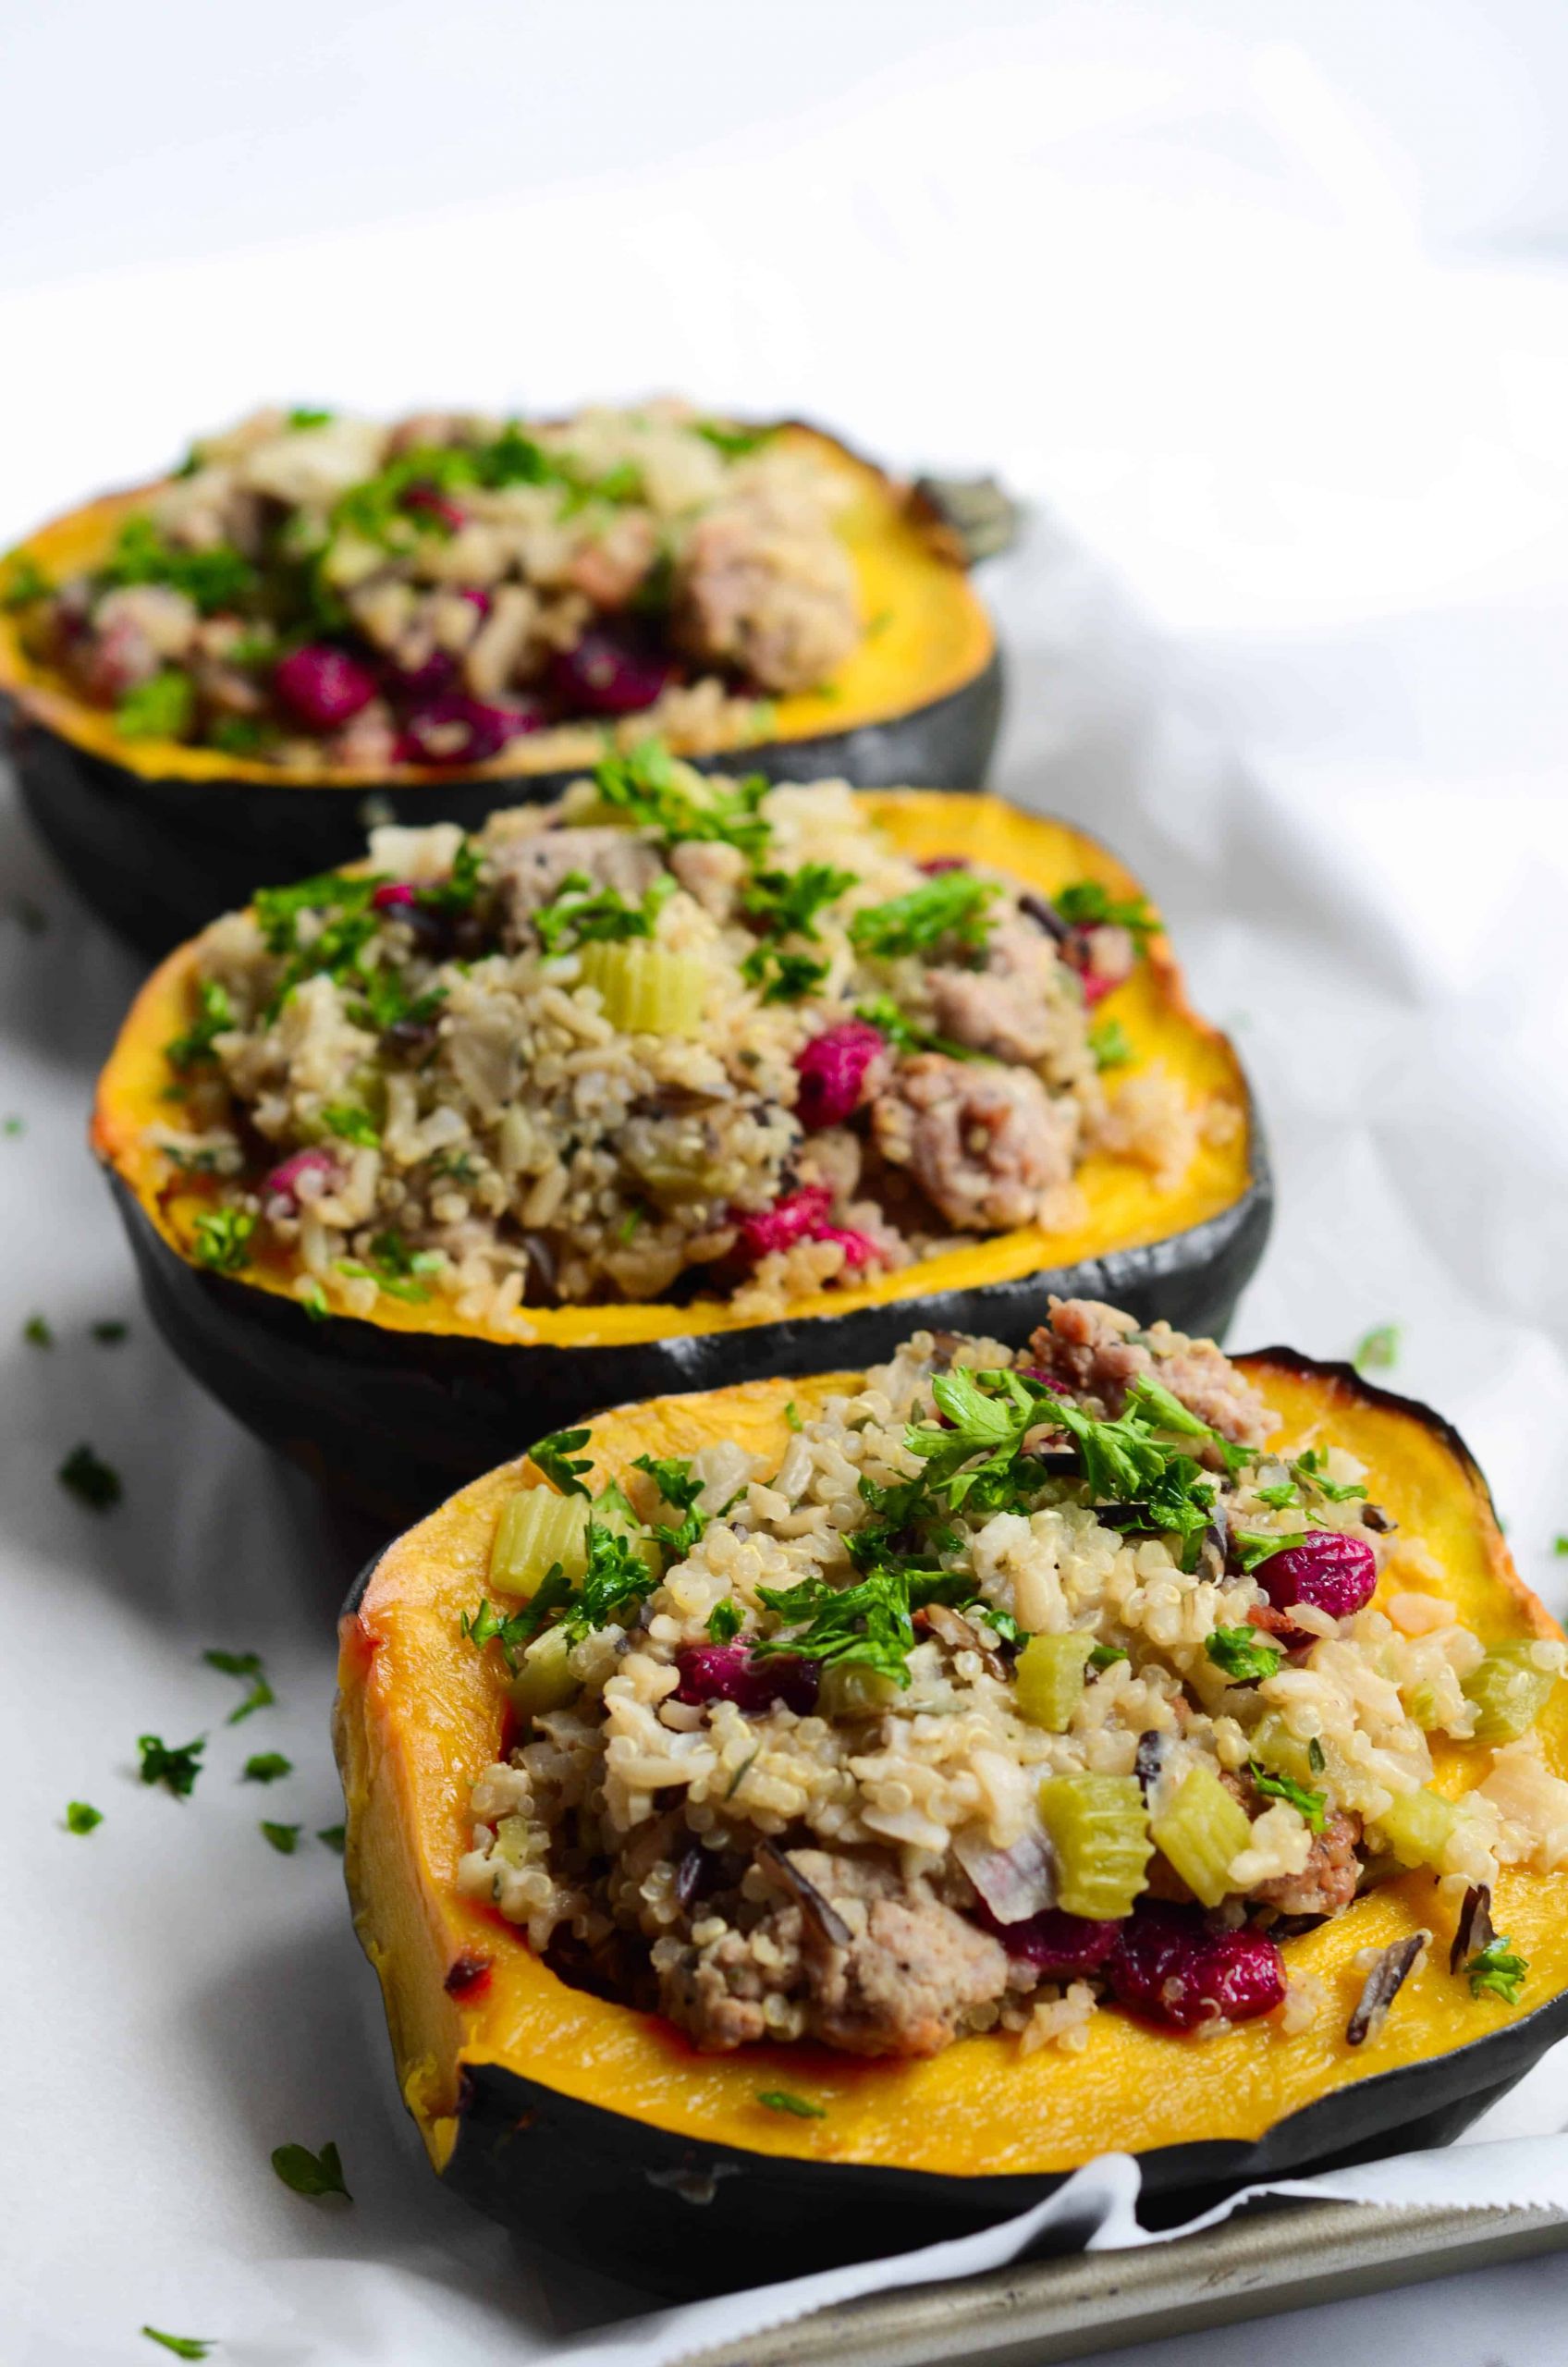 Low Carb Acorn Squash Recipes
 Stuffed Acorn Squash with Sausage and Cranberry Stuffing